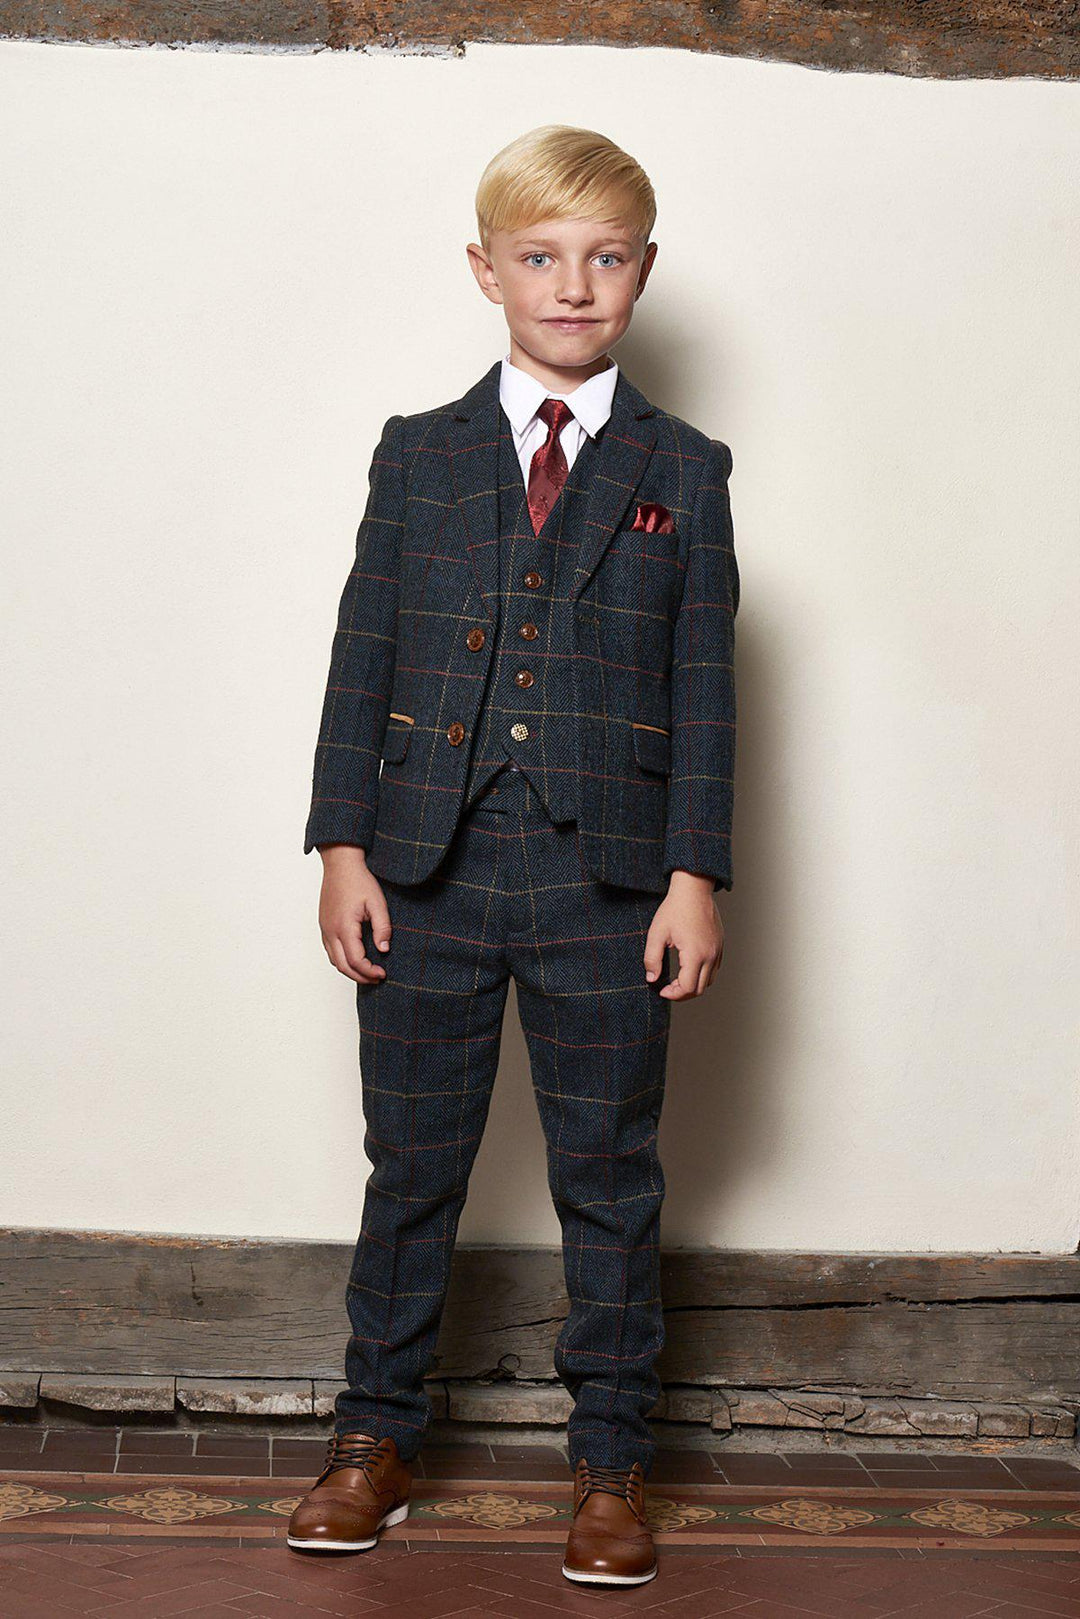 Matching Father & Son | Men’s ETON Navy Blue Tweed Check Three Piece Suit